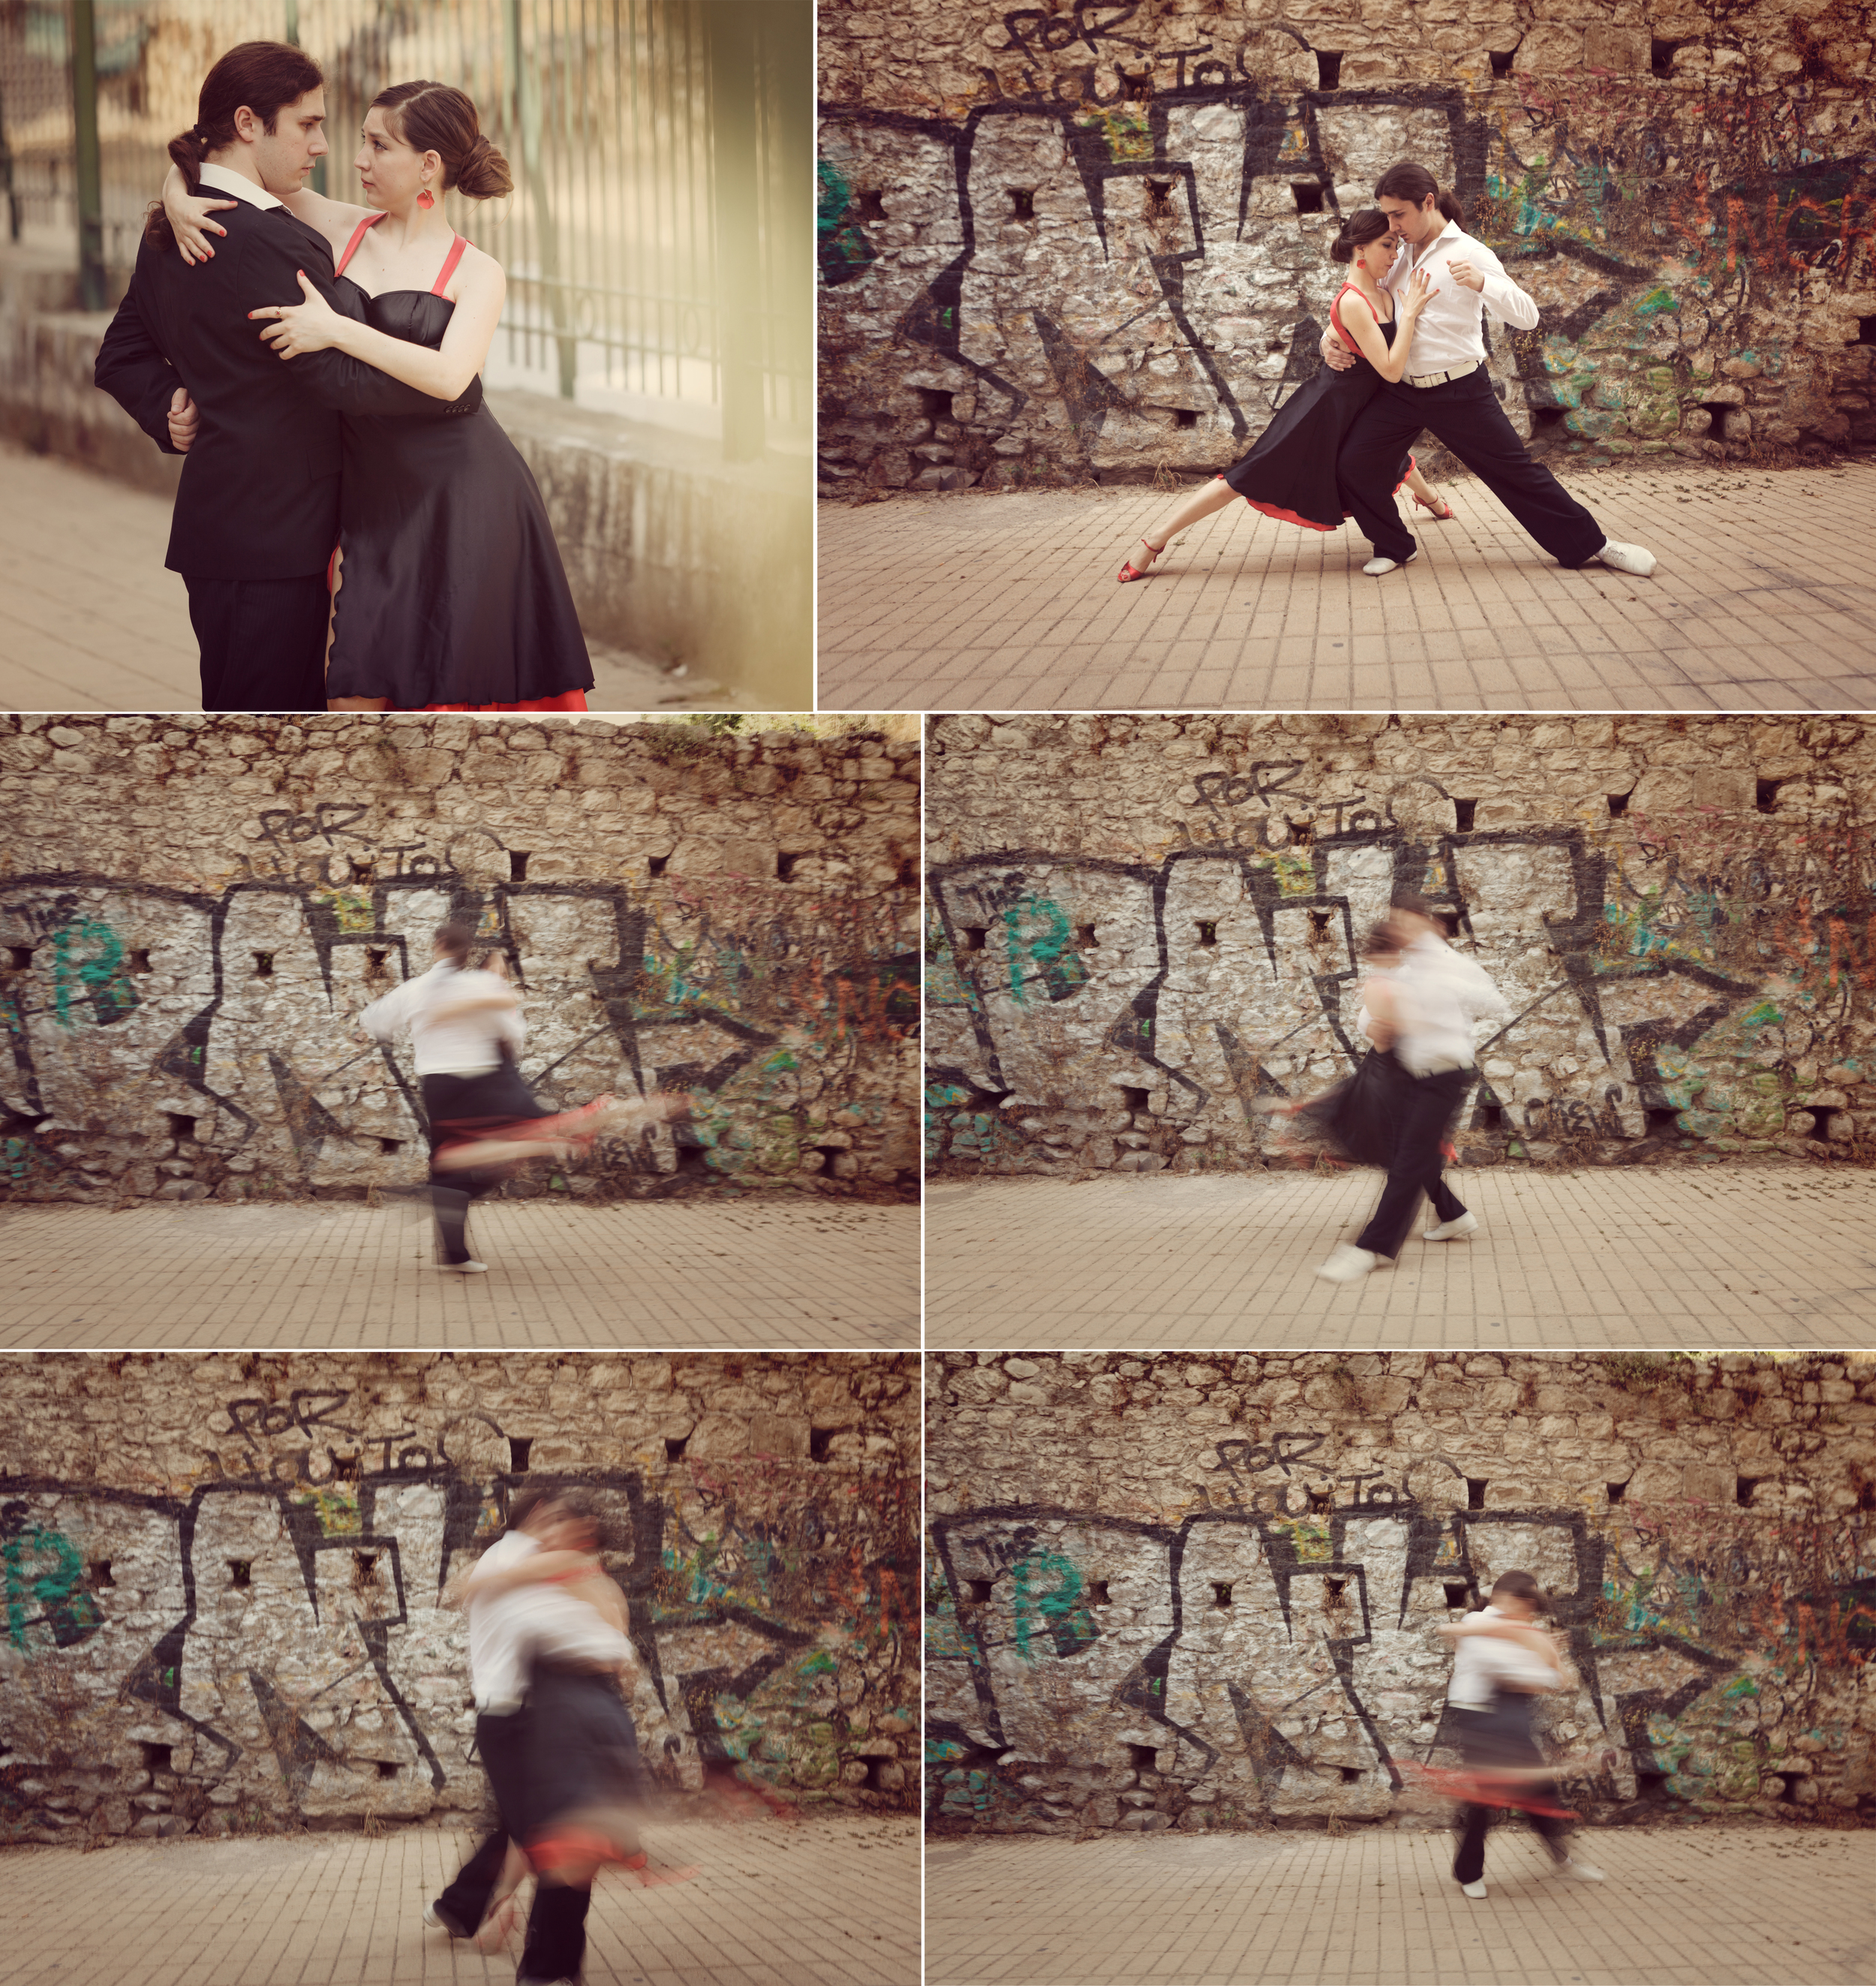 ANDRIOPOULOS_PHOTOGRAPHY TANGO 6.jpg